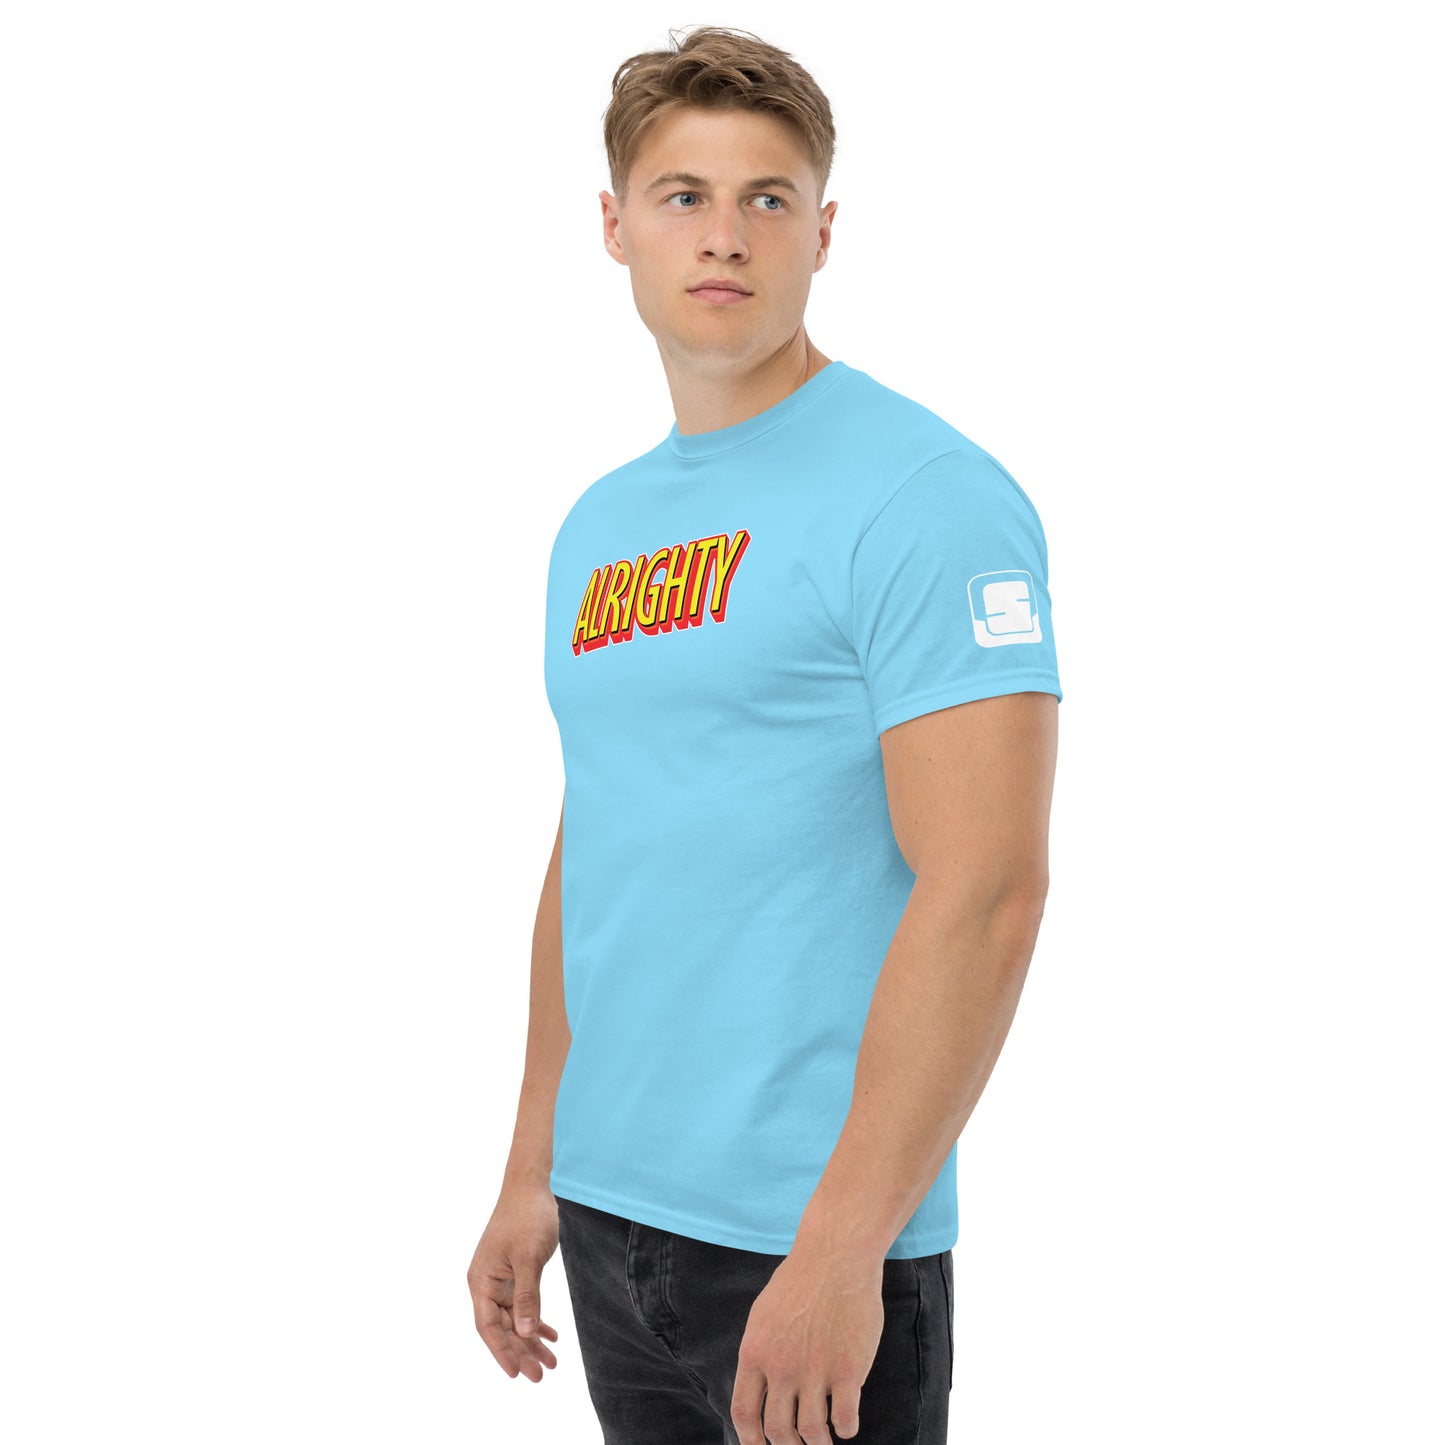 Focused young man in a sky blue t-shirt with the word 'ALRIGHTY' in bold, flame-like font across the chest, a logo patch on the sleeve, paired with dark jeans, standing against a neutral backdrop.